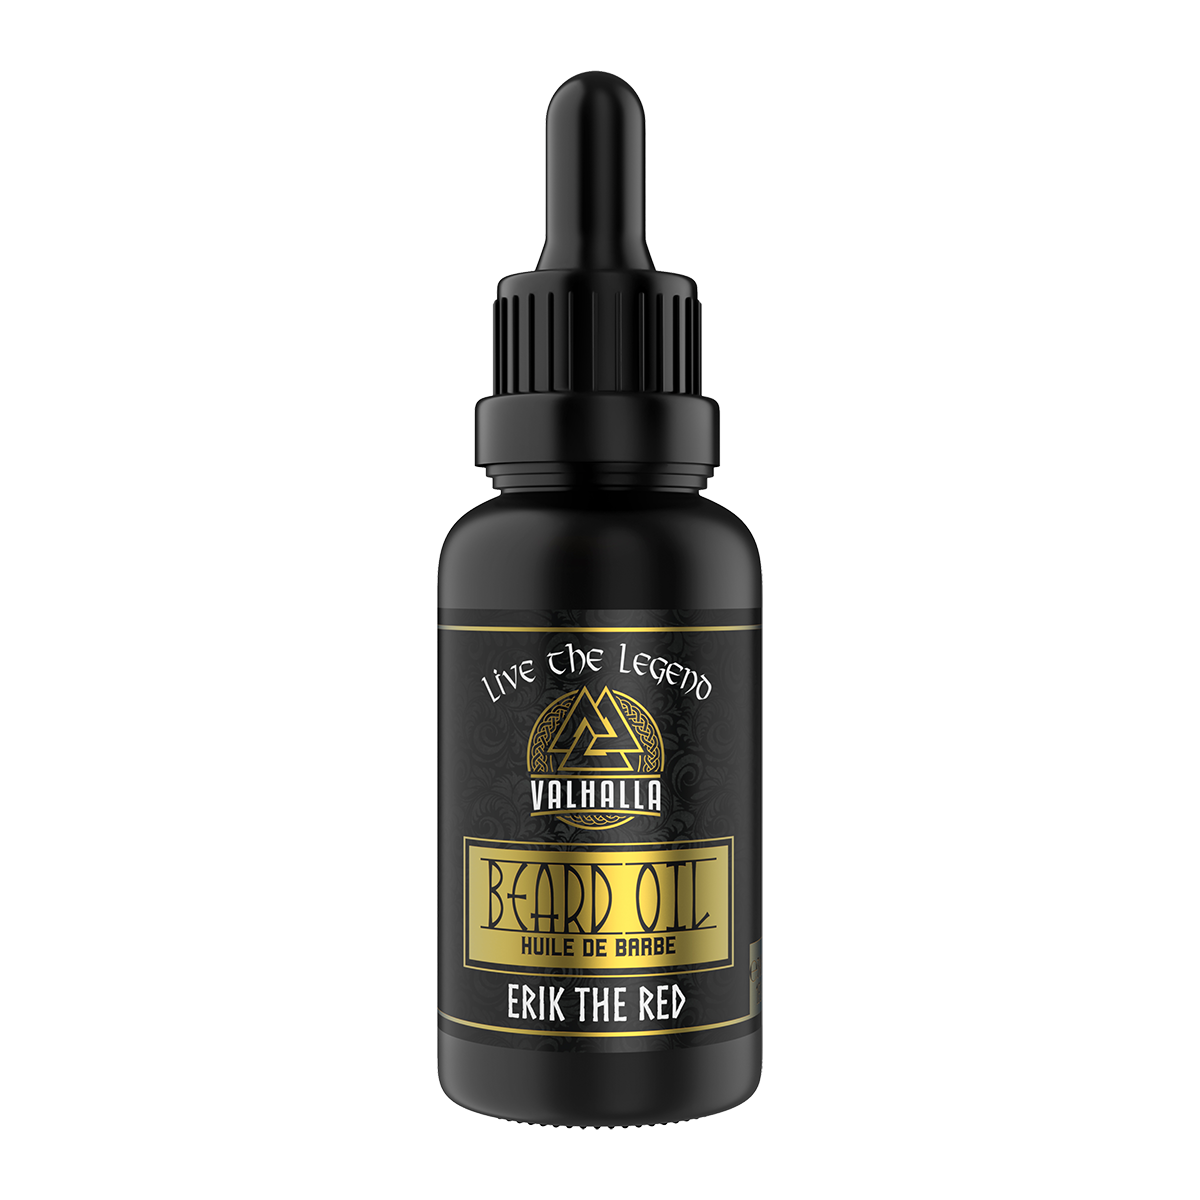 Erik the Red Beard Oil by Valhalla Legend - Warrior Grade Beard Care made in Canada